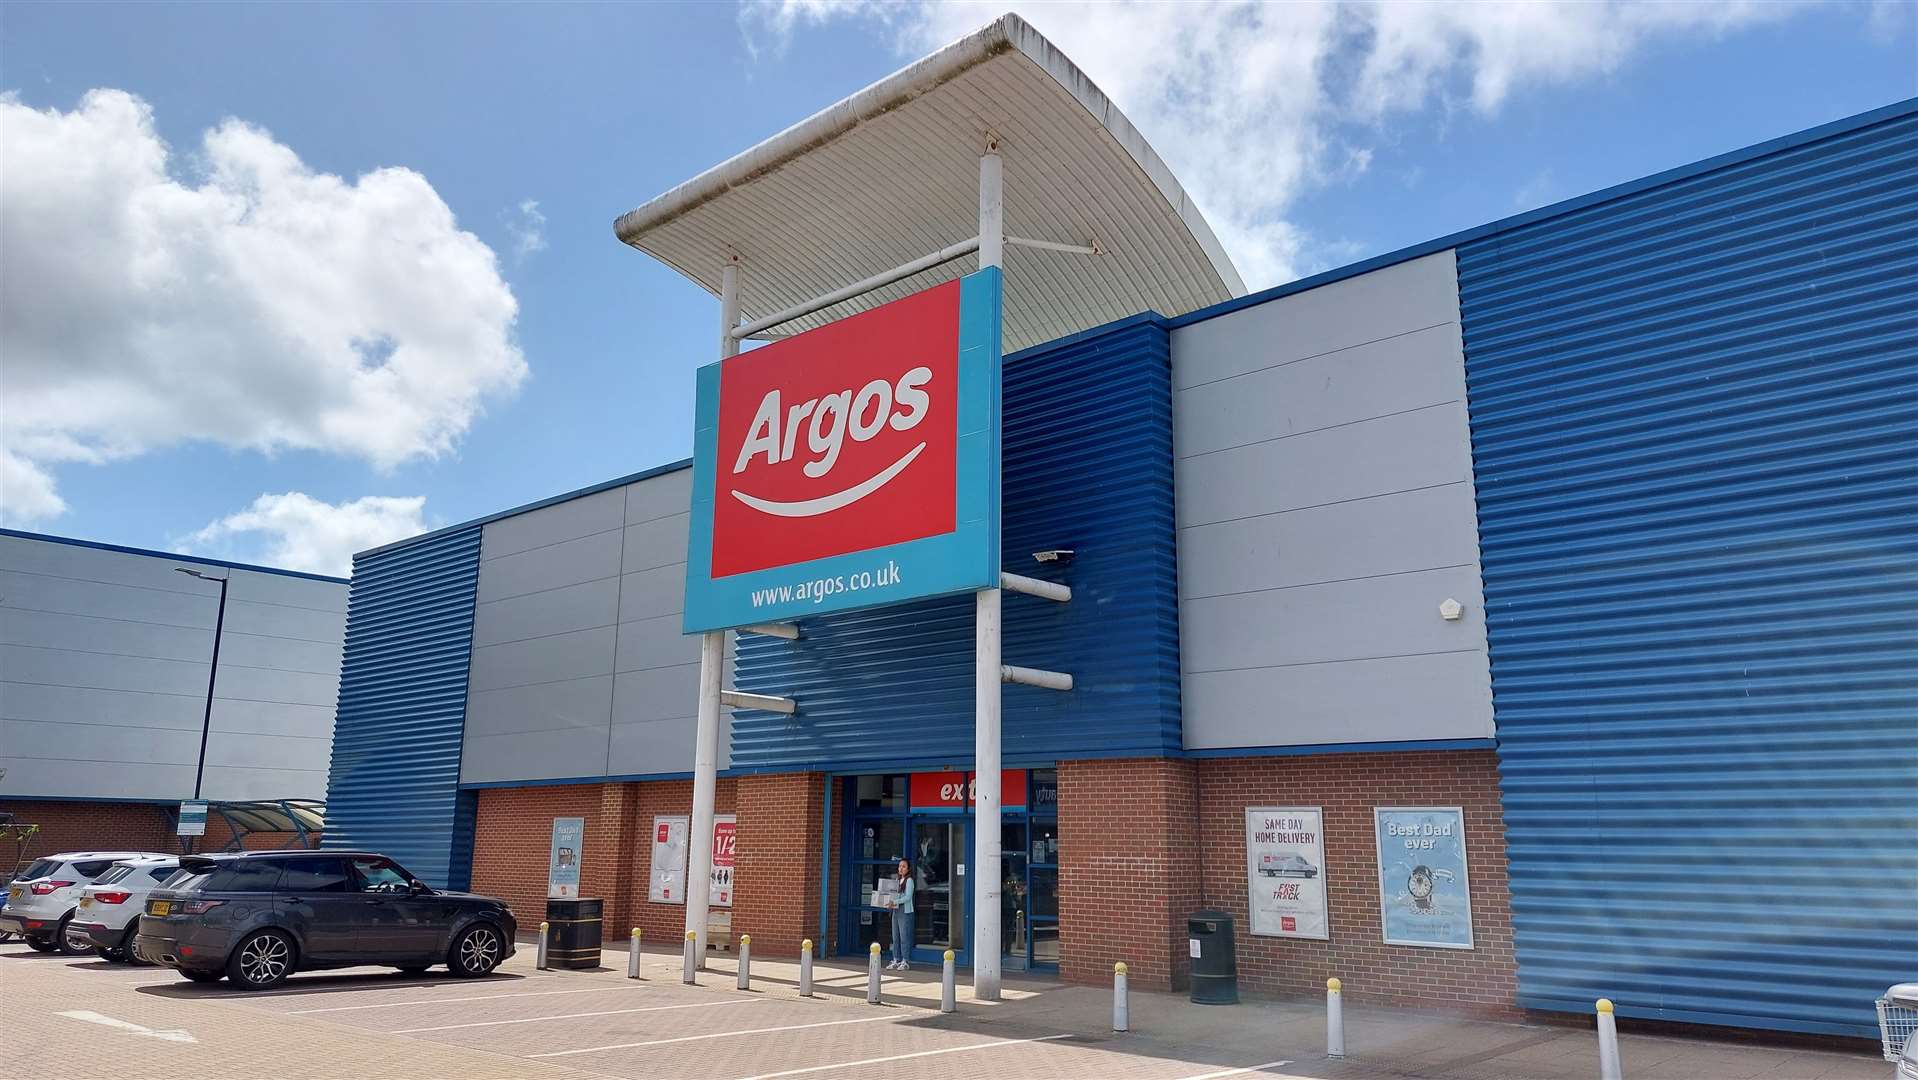 Argos on Ashford Retail Park off the A2070 will be closing later this year